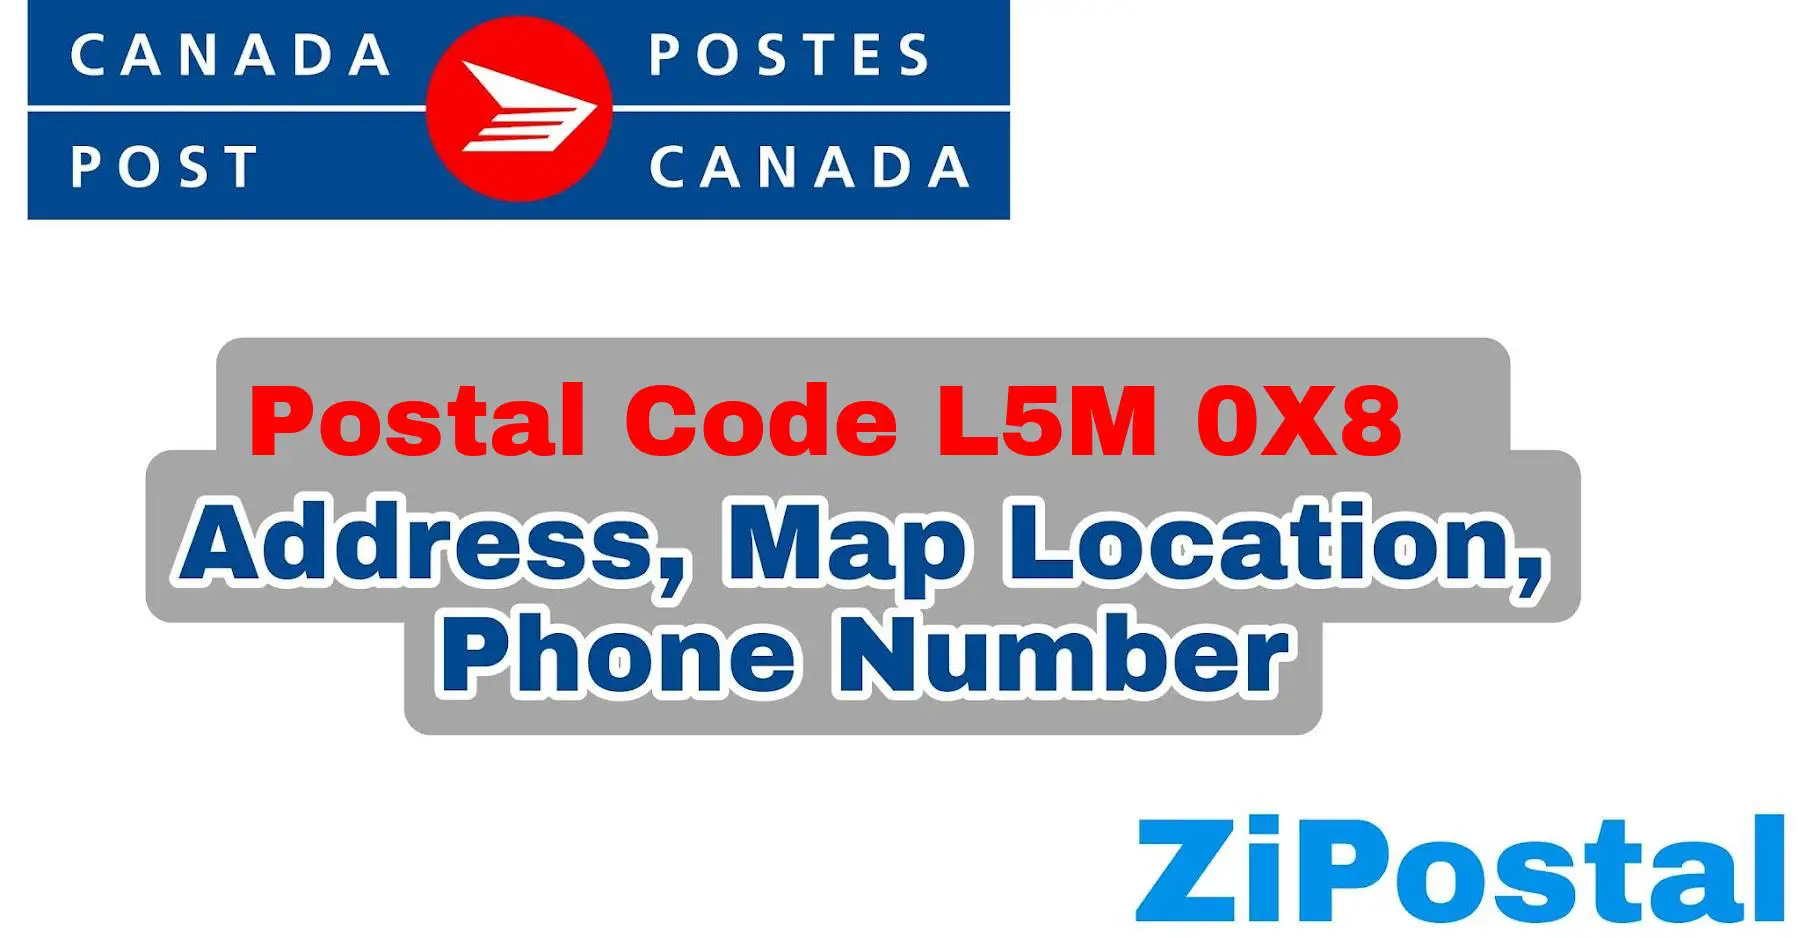 Postal Code L5M 0X8 Address Map Location and Phone Number